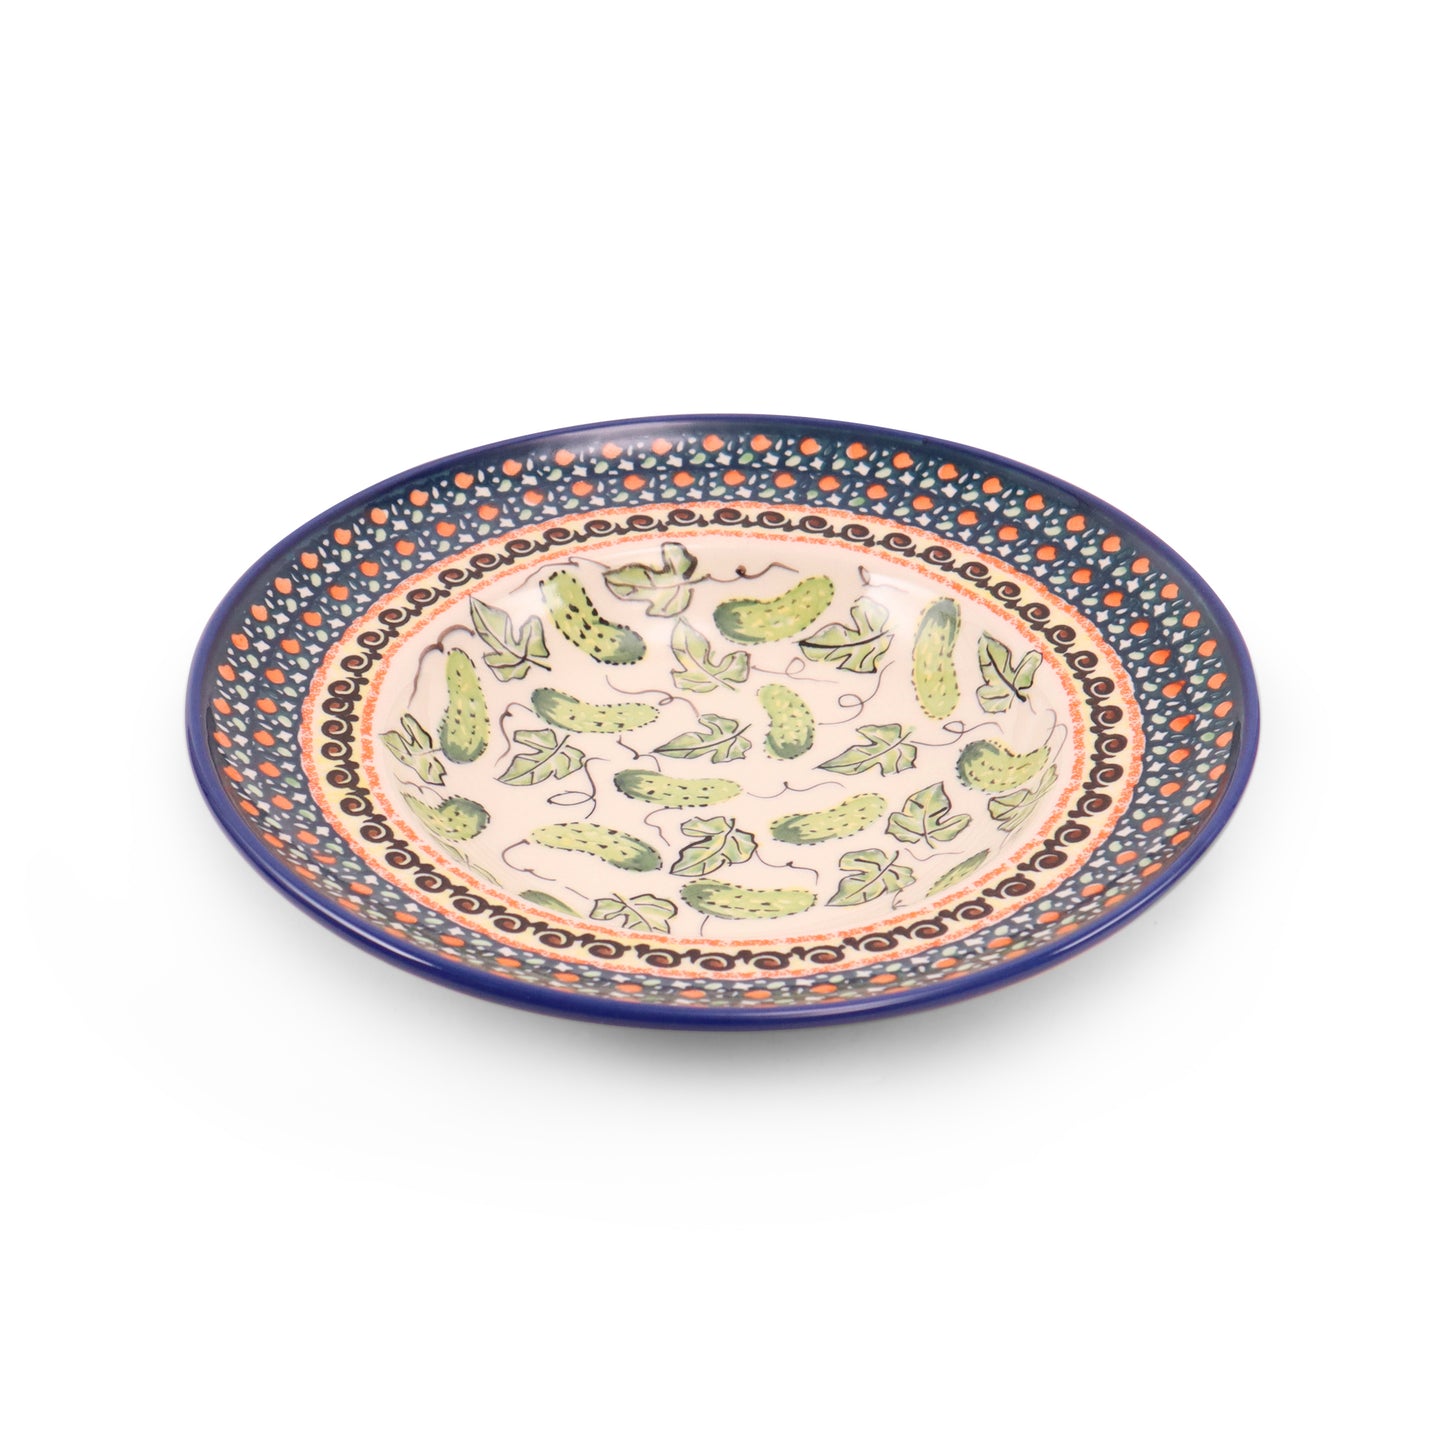 11.5" Salad Bowl. Pattern: In a Pickle